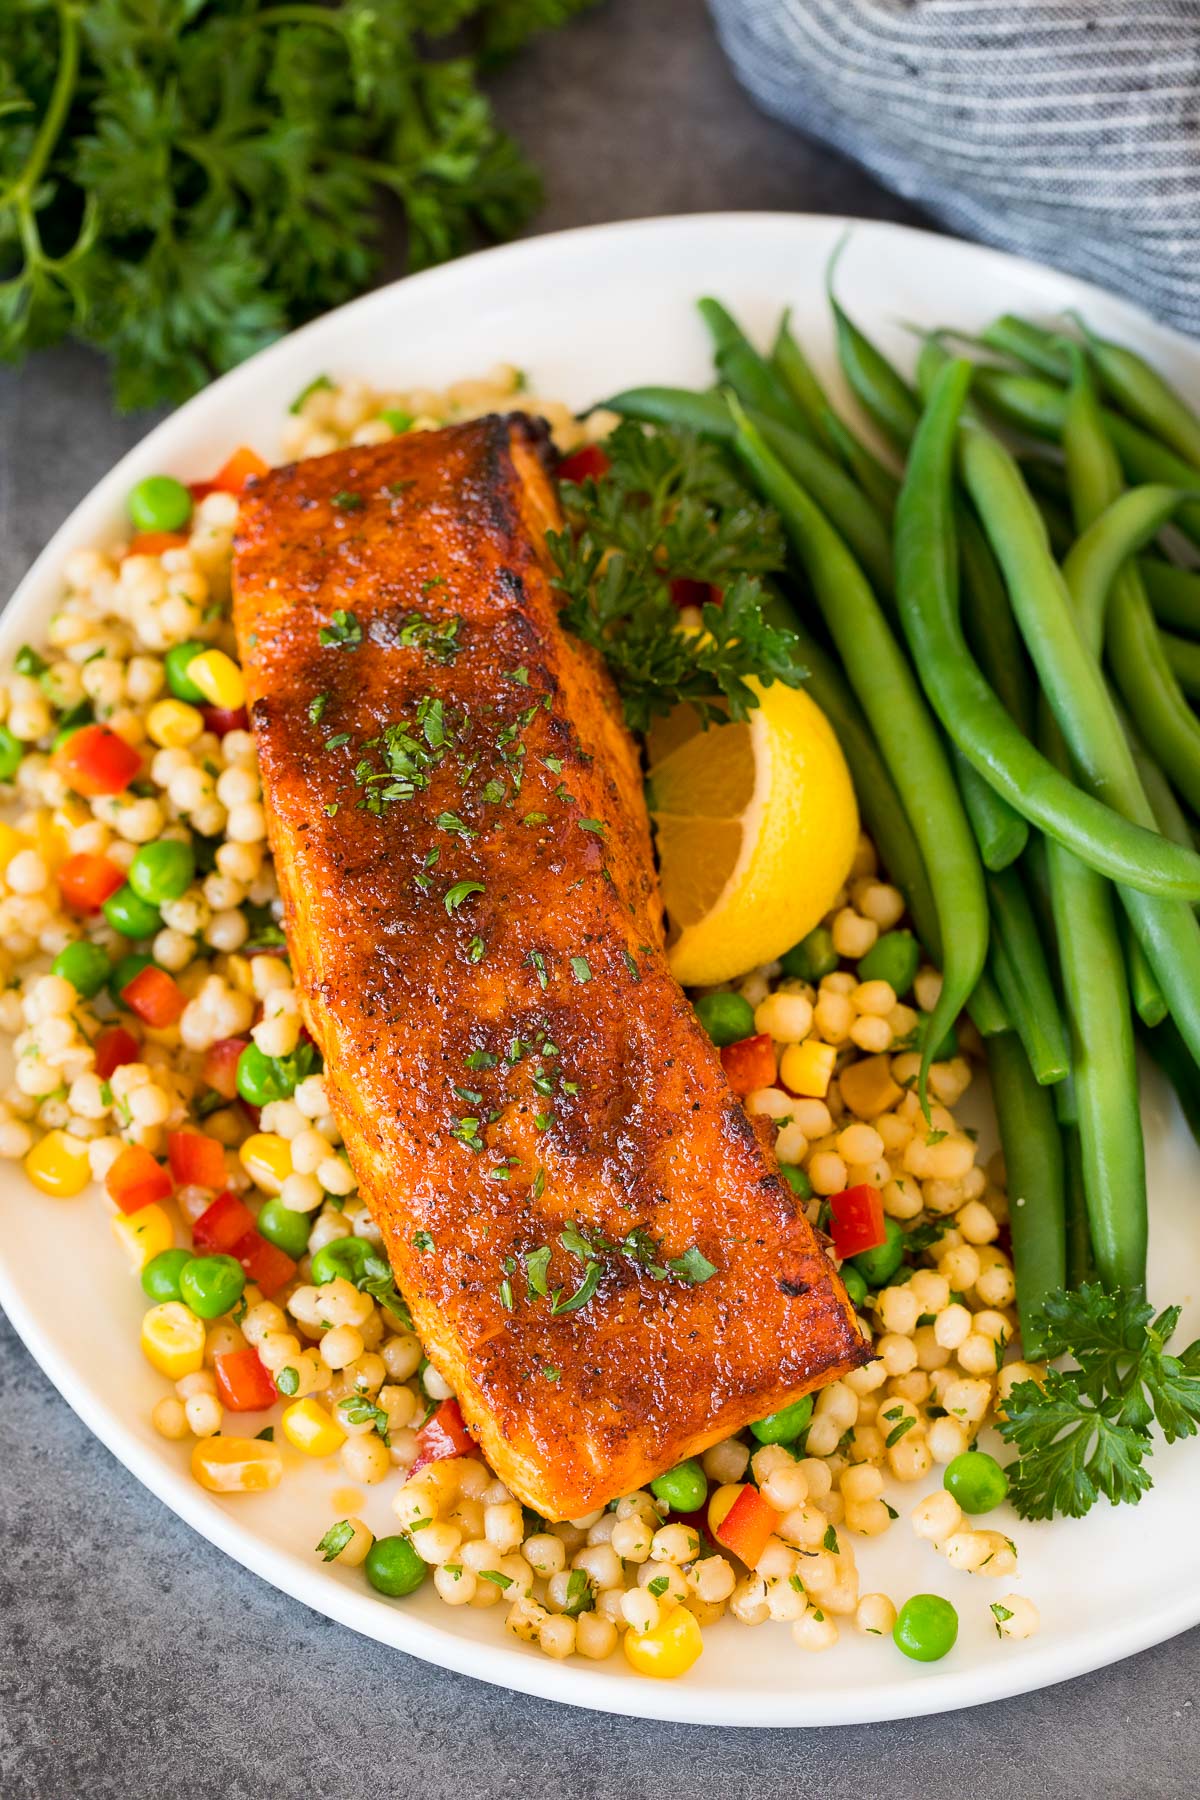 Salmon fillet baked with salmon seasoning served with couscous and green beans.